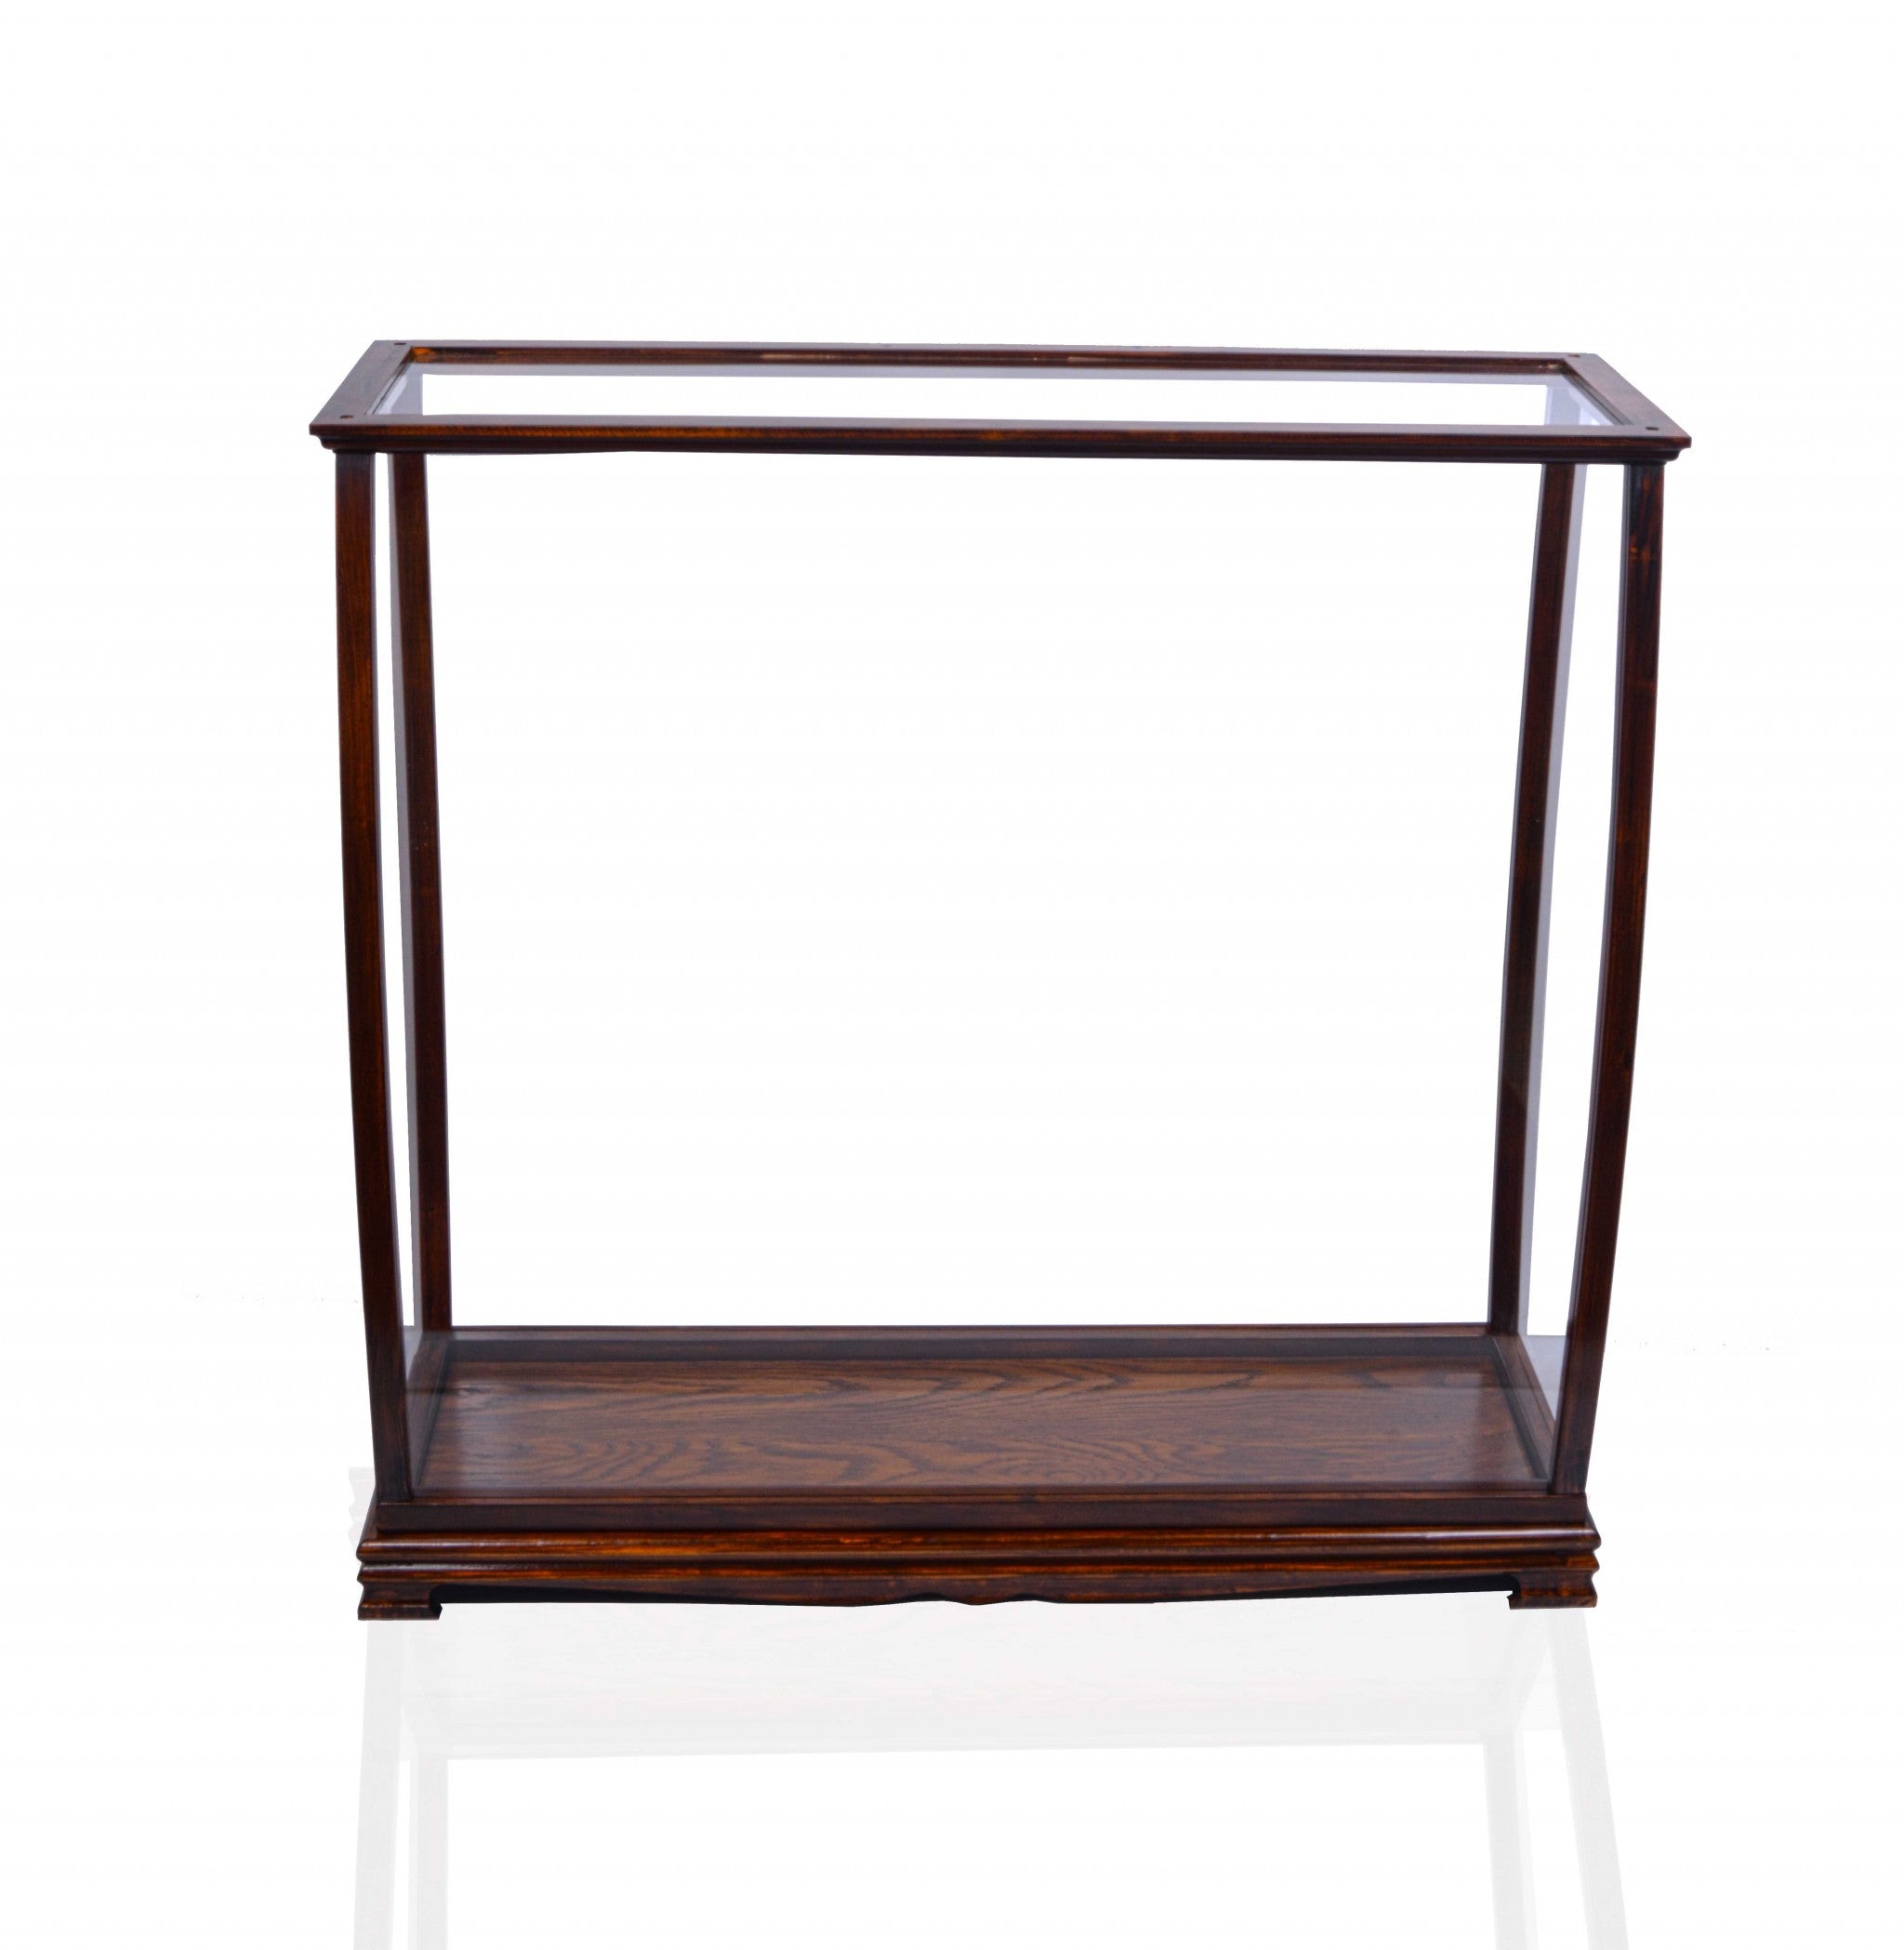 14" Silver And Clear Glass Standard Display Stand